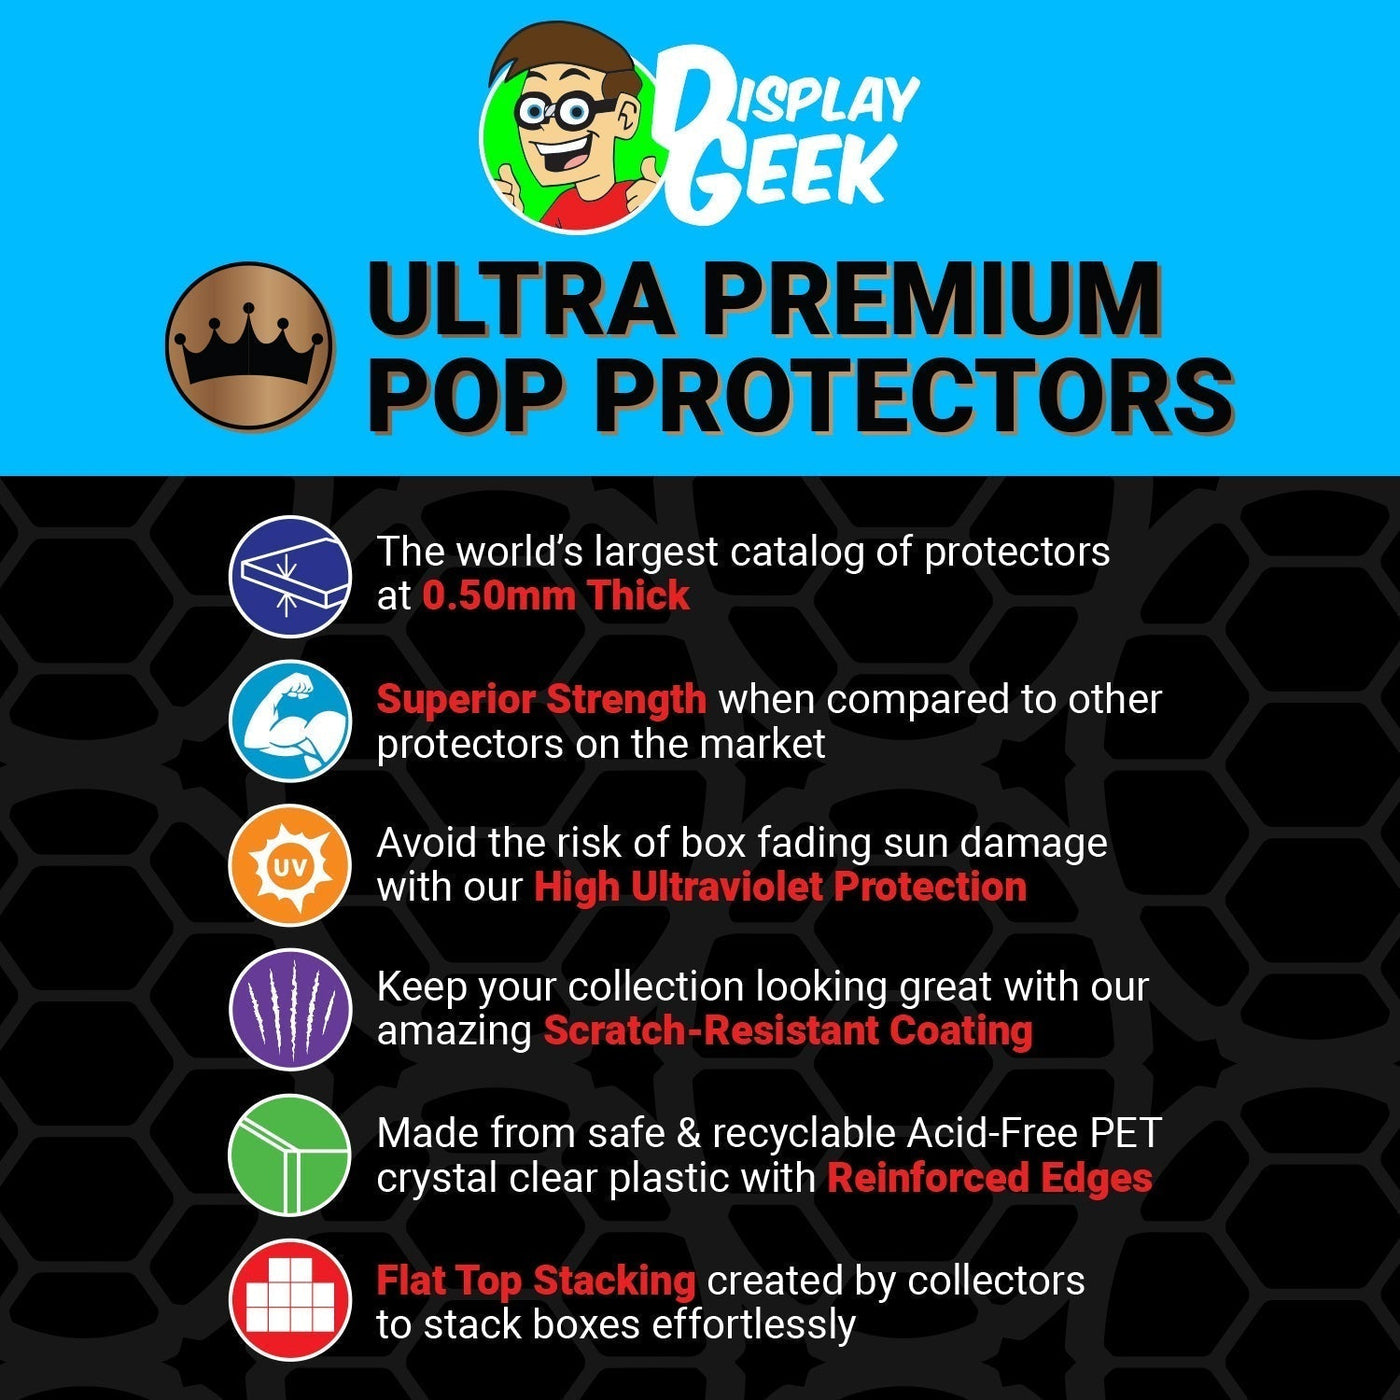 Pop Protector for Victory Shawarma Tony Stark #756 Funko Pop Deluxe on The Protector Guide App by Display Geek